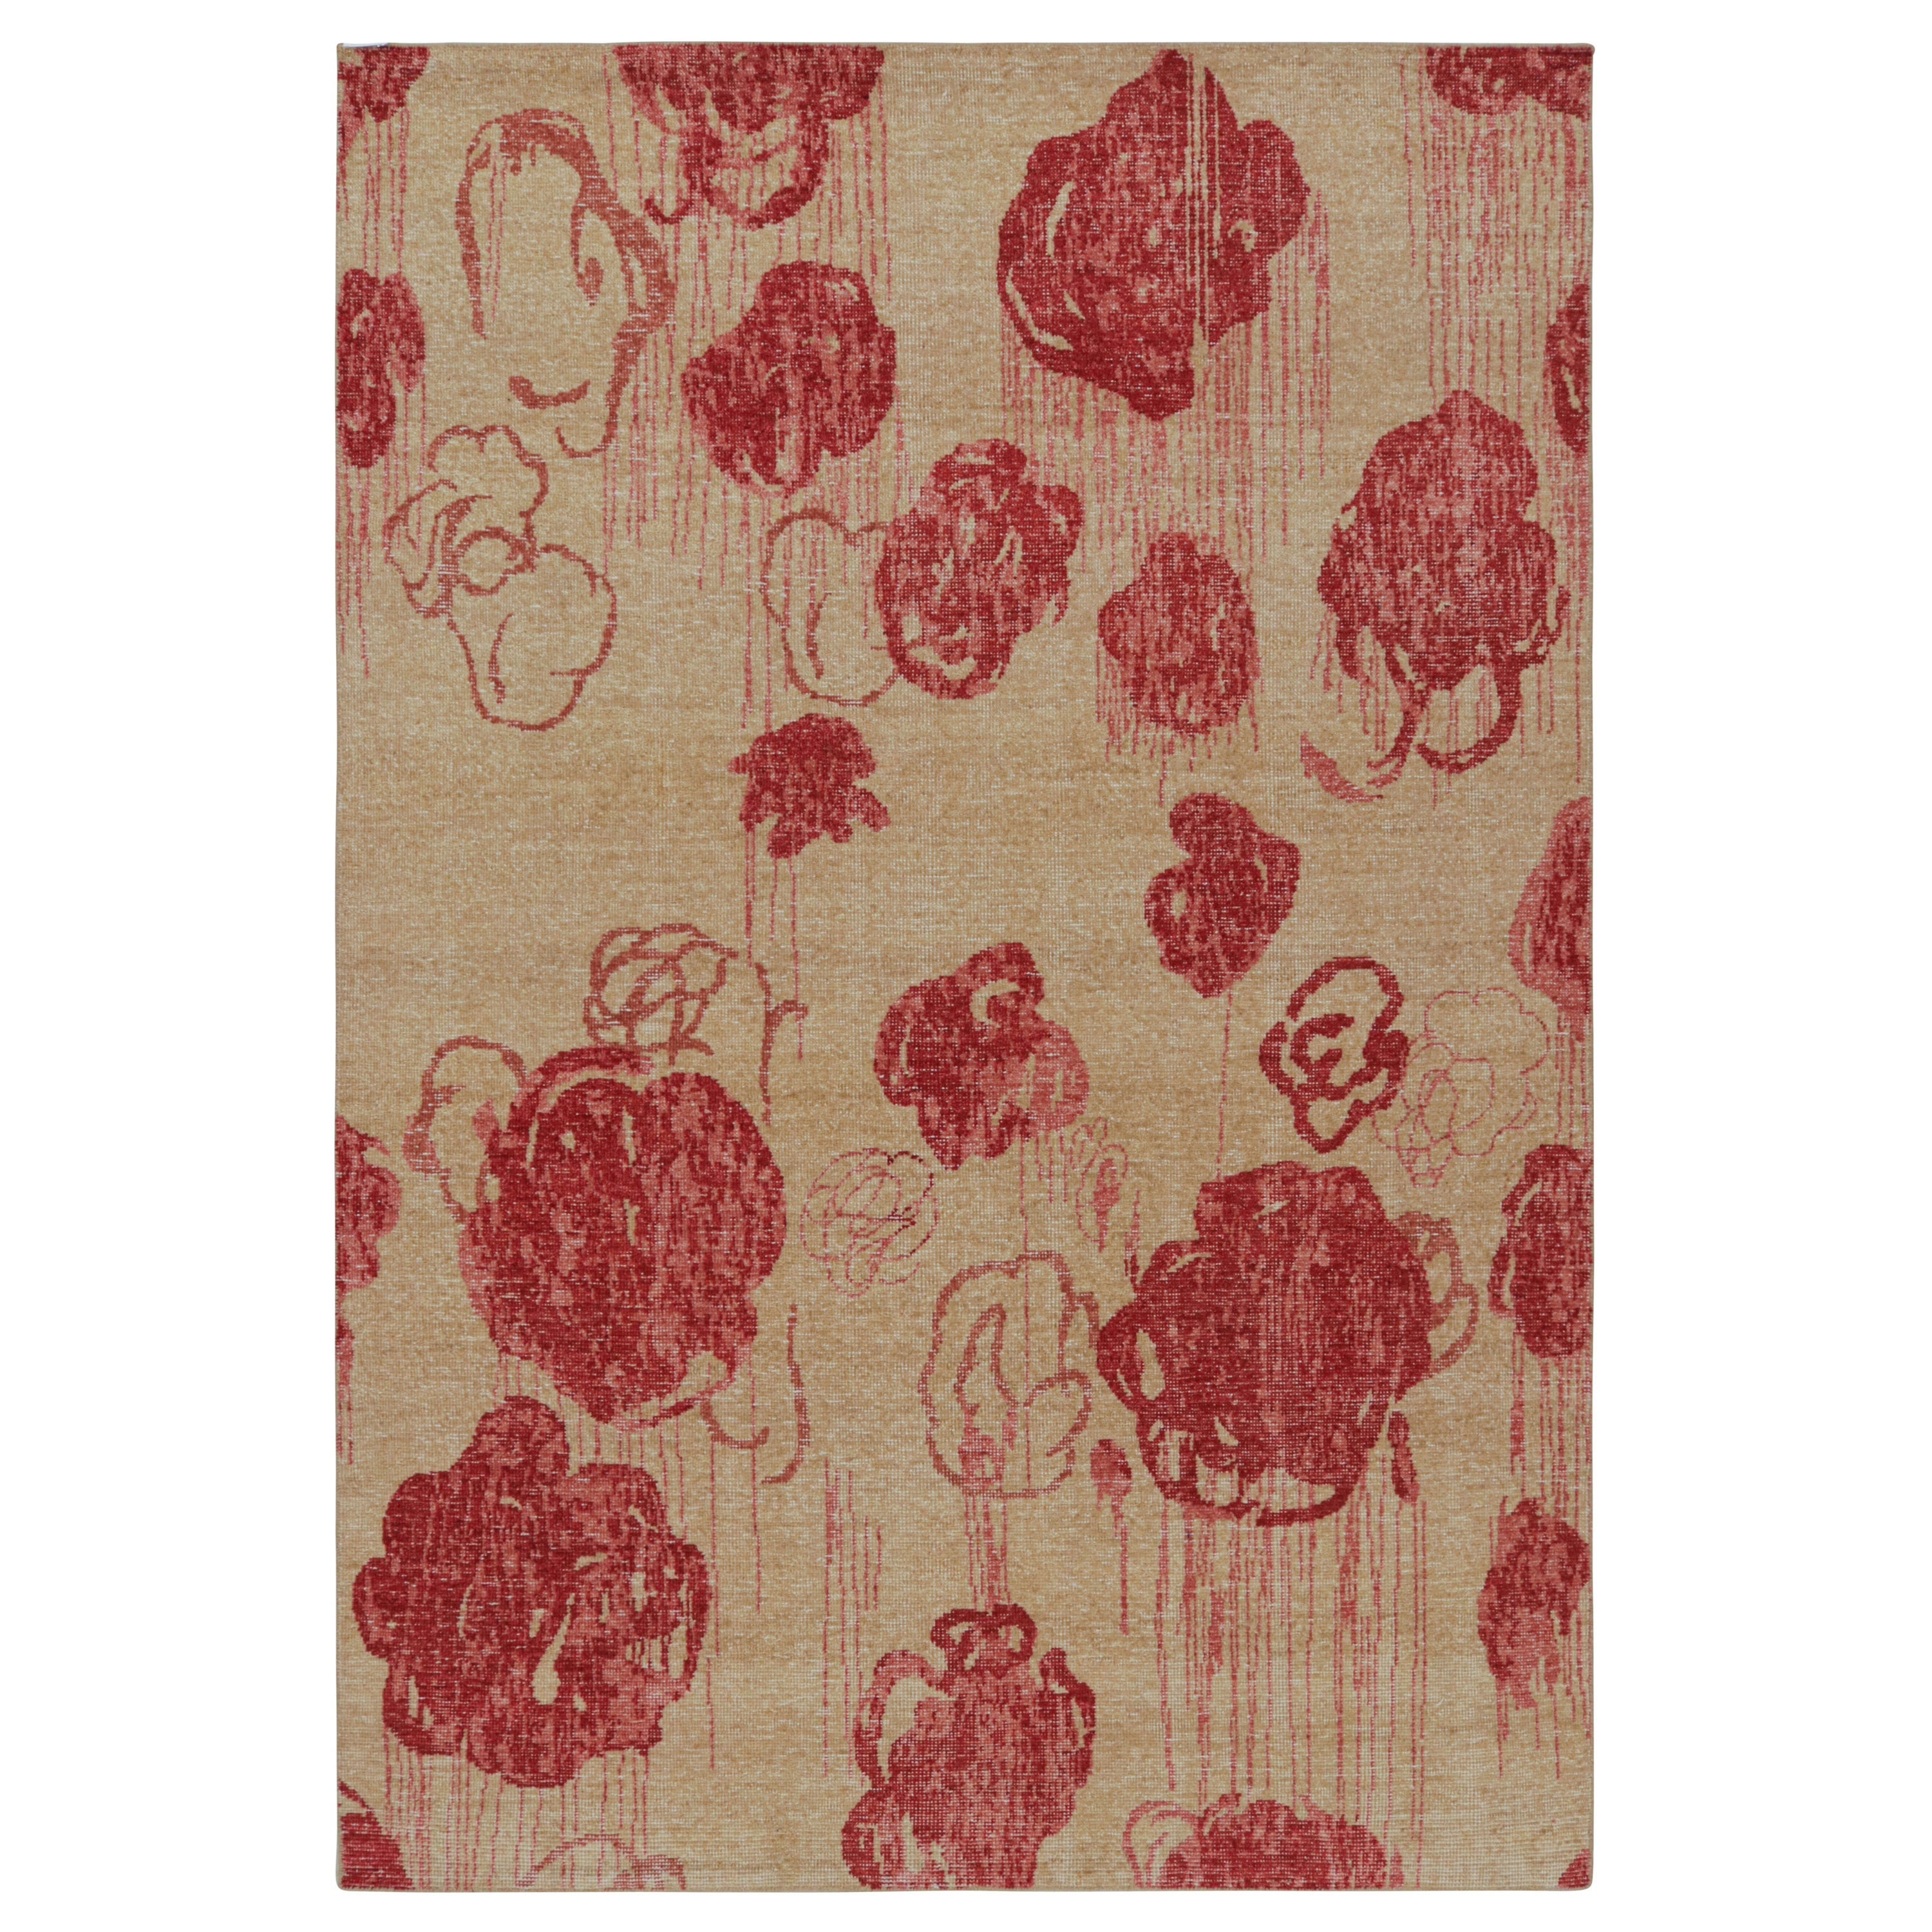 Rug & Kilim’s Modern Abstract Art Rug in Beige-Brown, with Red Floral Patterns